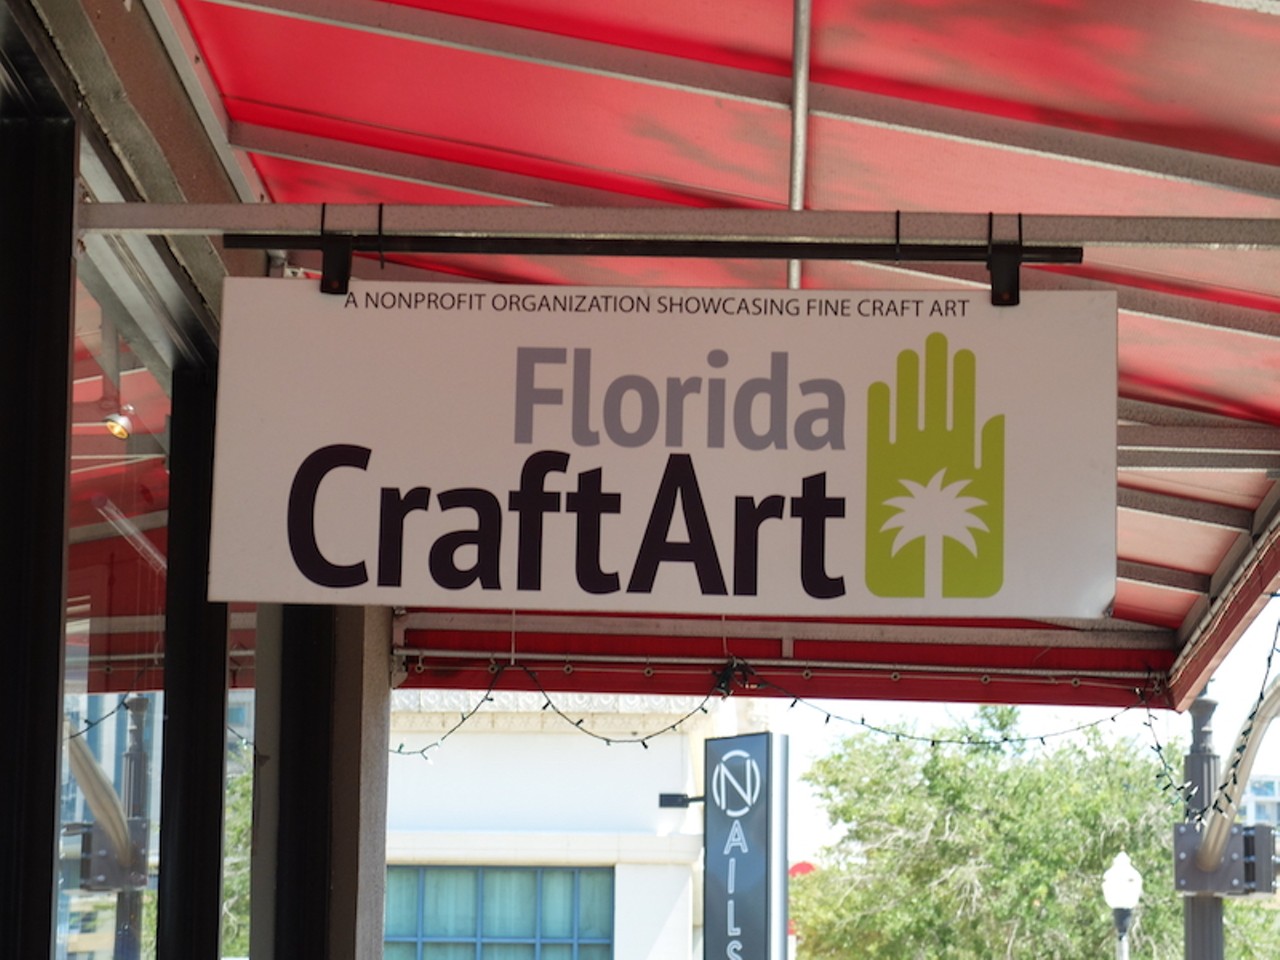 Browse Florida Craft Art in downtown St. Petersburg
Some of the best fine craft artists in Florida
Photo via Cathy Salustri